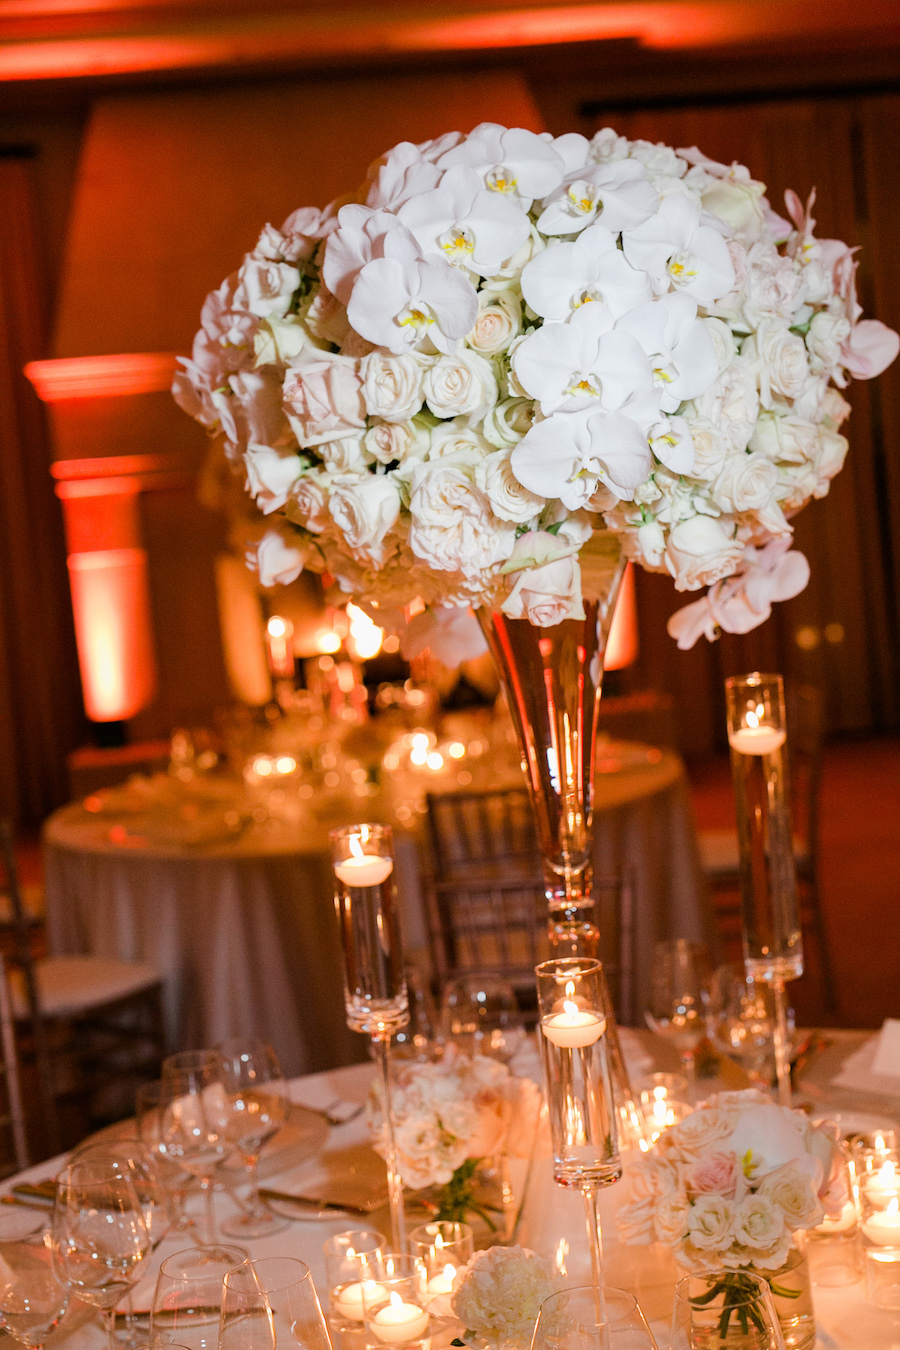 Pure Lavish Events, Pelican Hill Weddings, Flowers By Cina, Kaysha Weiner, Hoo Films, Vivian Tran Artistry, Sweetly Said Press, Heidi Davidson Design, Naples Strings, Brannan Entertainment, Focus Photo Suites, Strunz & Farah, Create A Party Rentals, Grace And Honey Cakes, In N Out Burger
